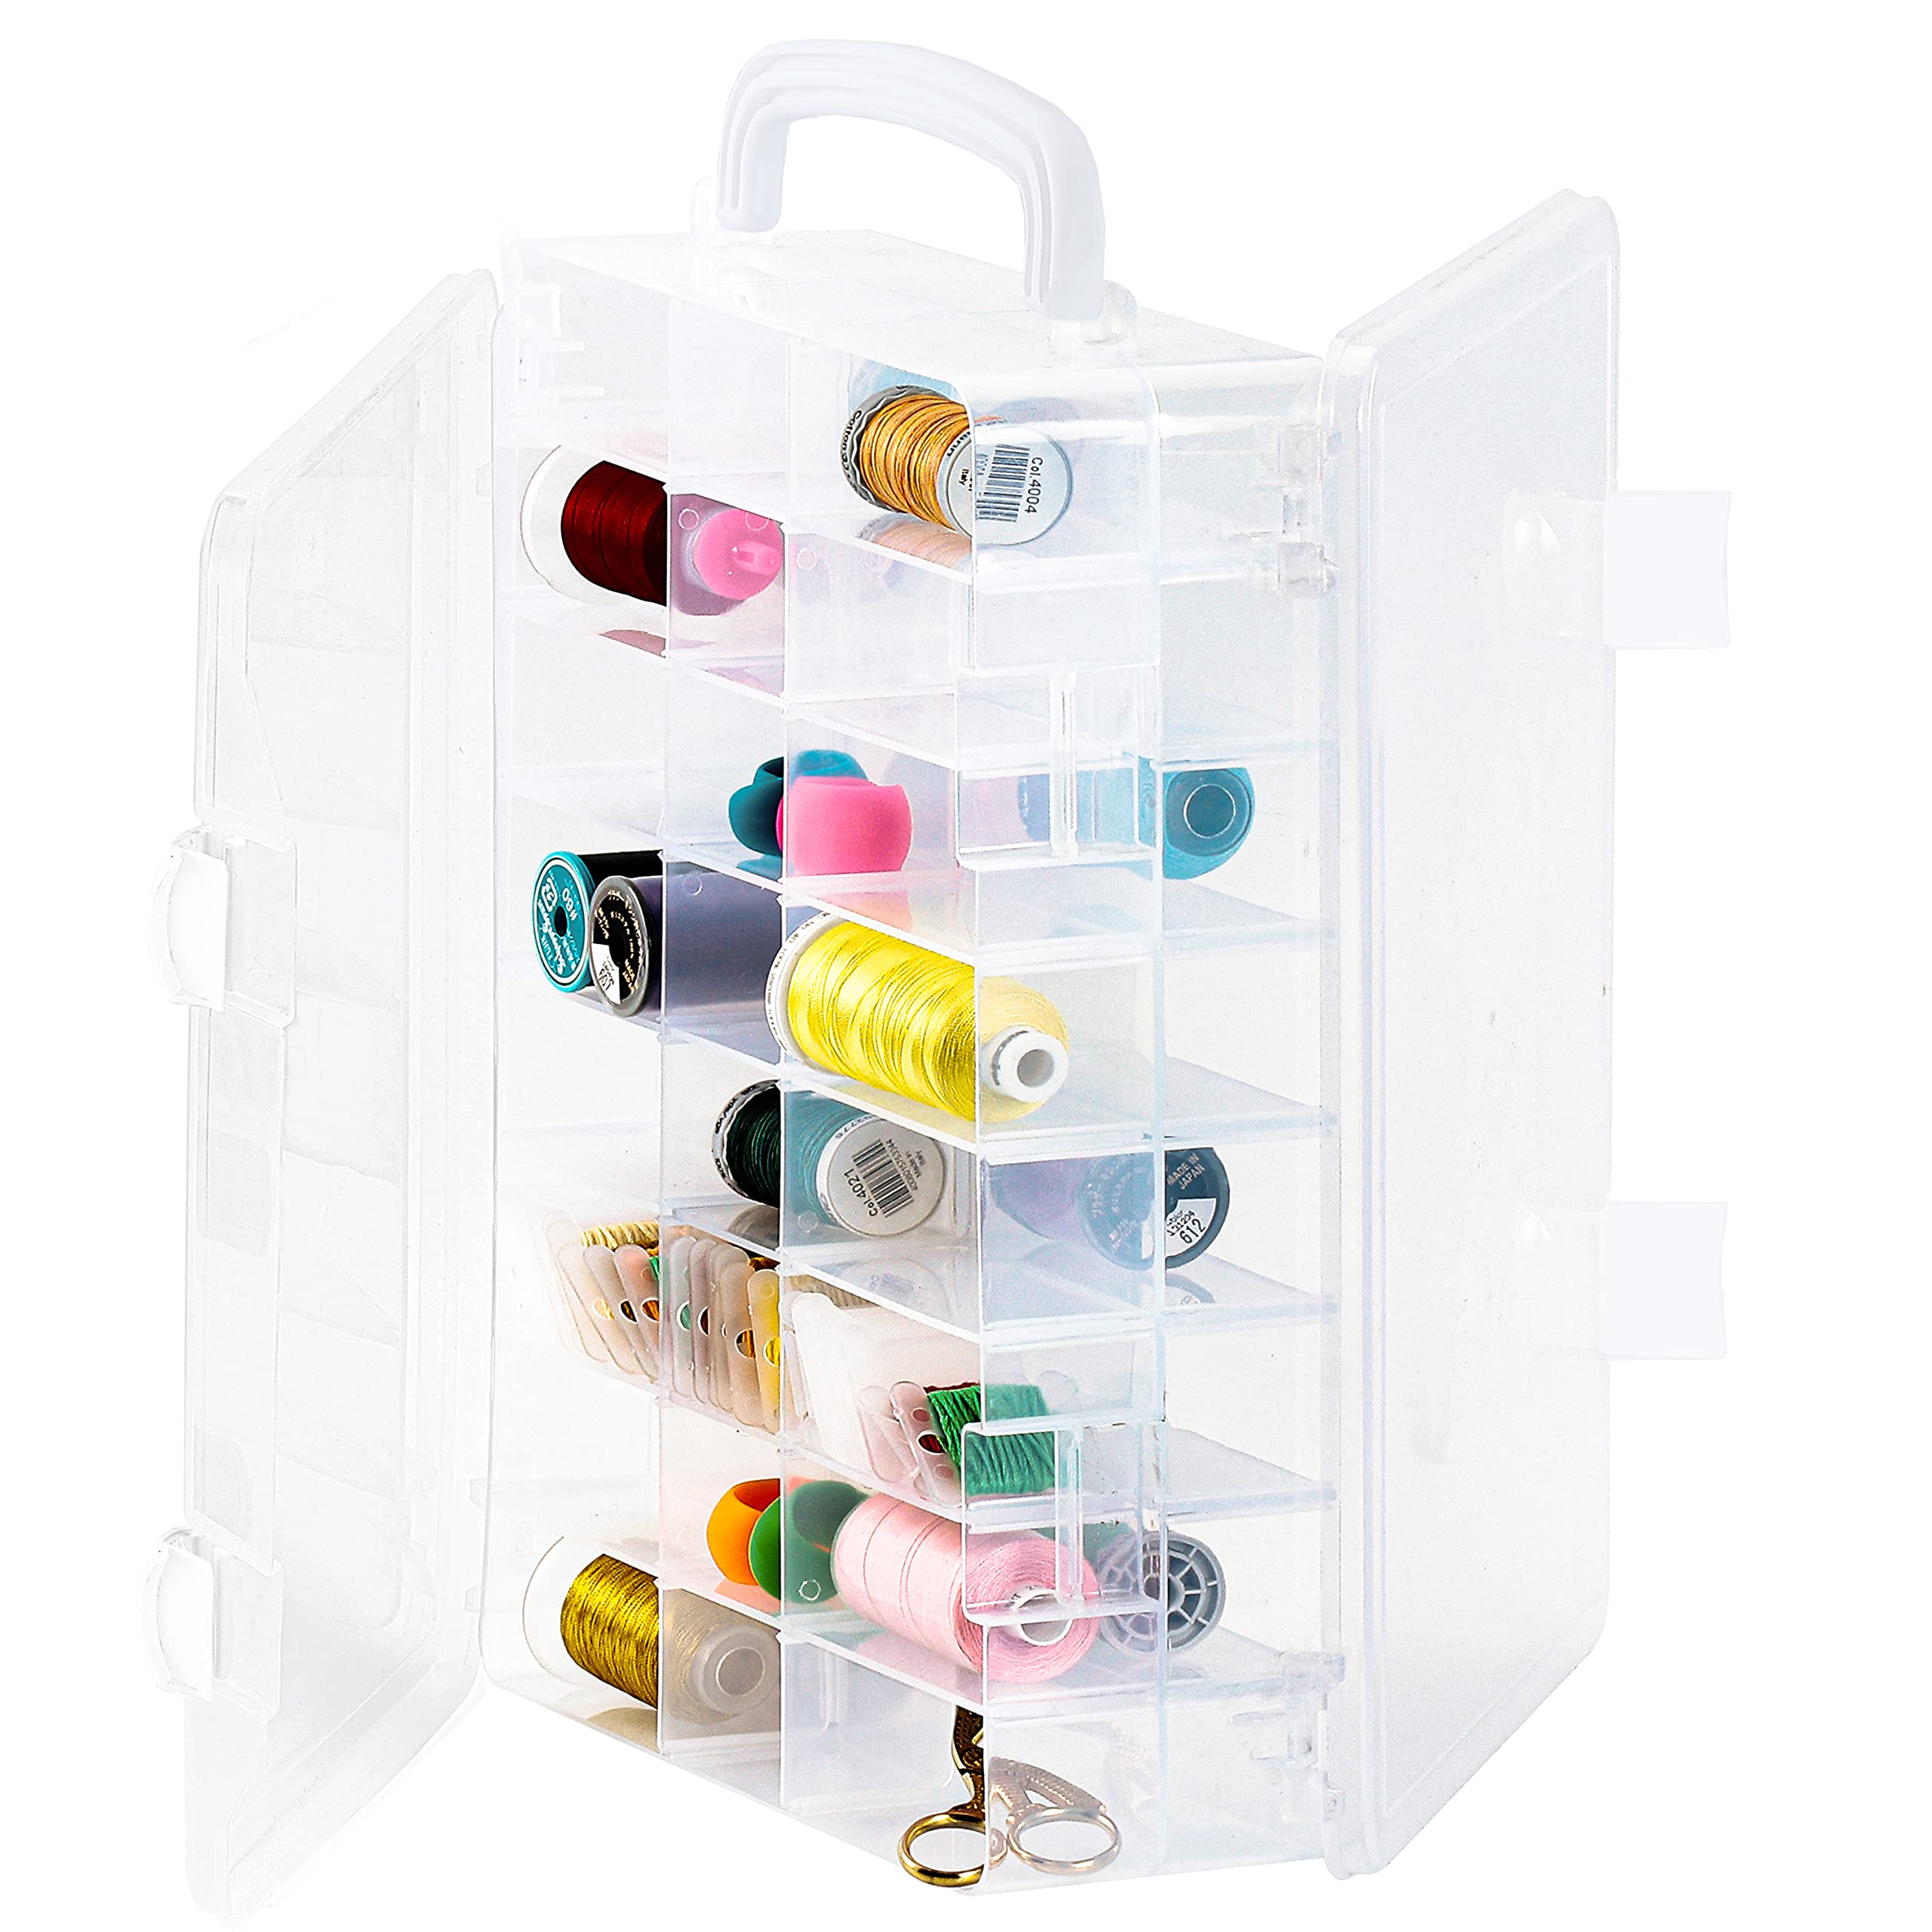 New brothread 2X60 Spools Wooden Thread Rack/Thread Holder Organizer with  Hanging Hooks for Embroidery Quilting and Sewing Threads